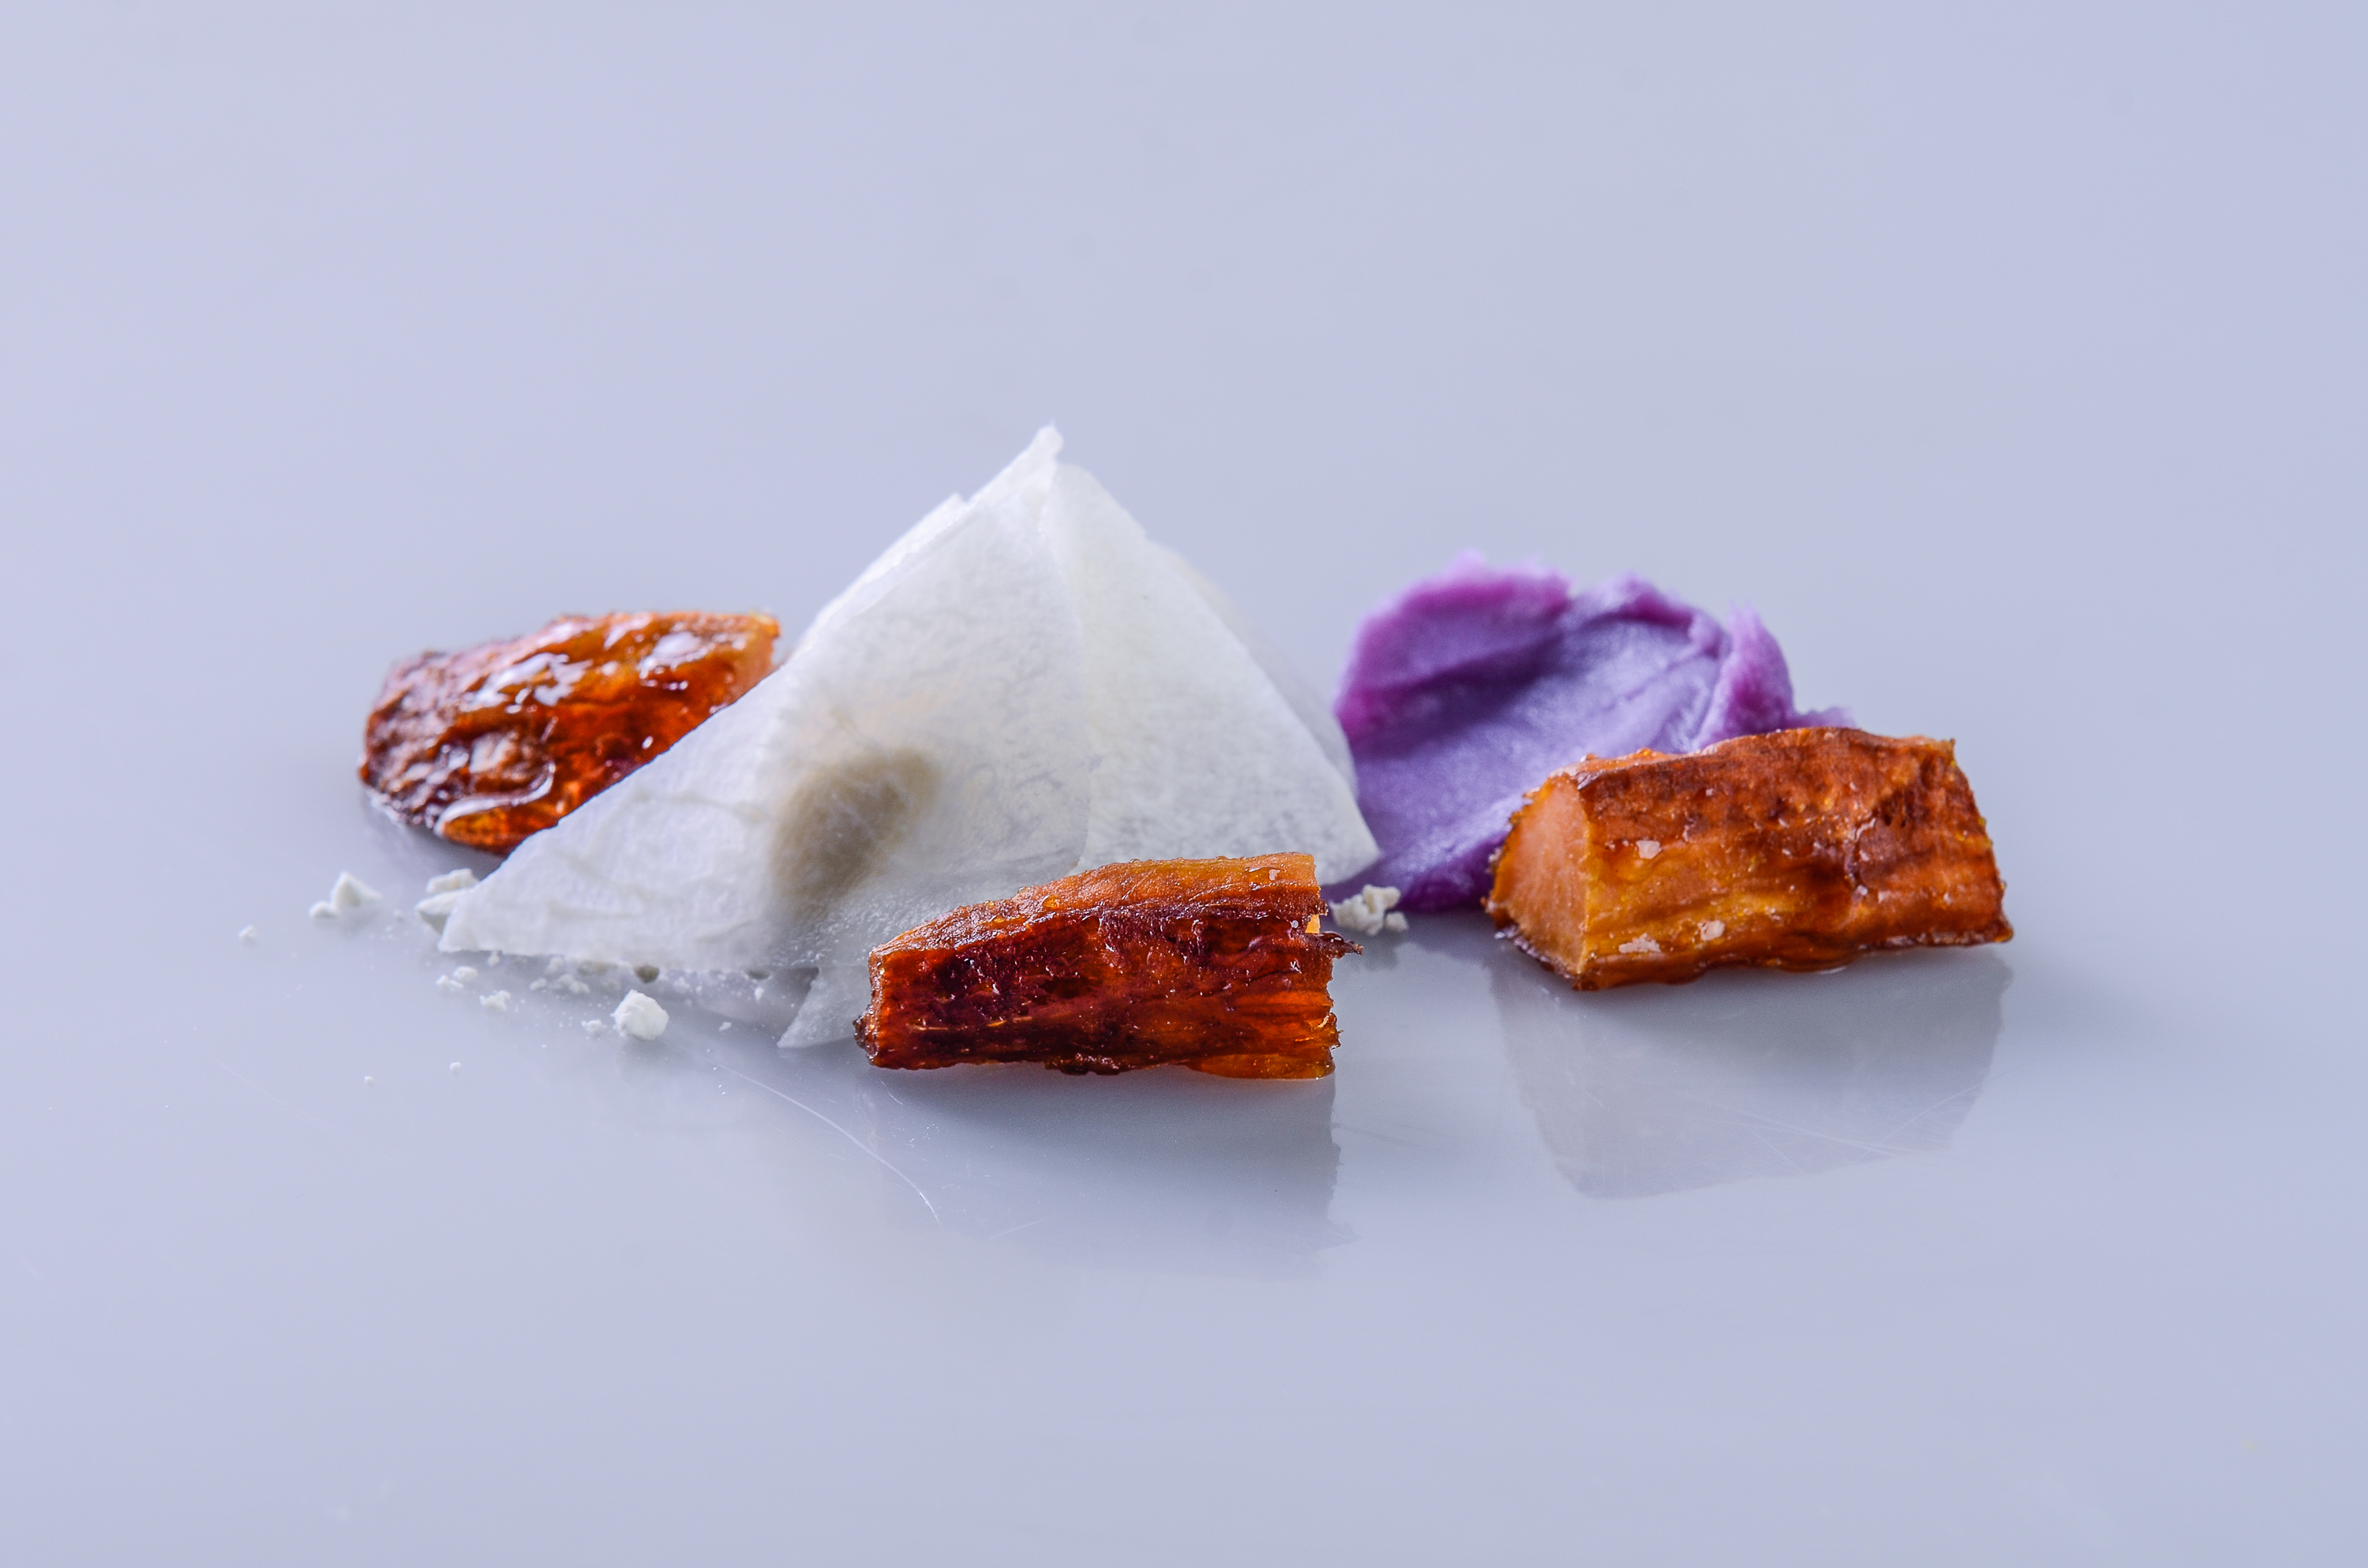 GALLERY VASK. Gallery Vask ranks 39th in the 2016 Asia's 50 Best Restaurants list. Pictured is their jicama, a dessert made of ube, camote, jicama, mango meringue, and cashew wine ice cream. Photo courtesy of Gallery Vask/Norman Lleses  